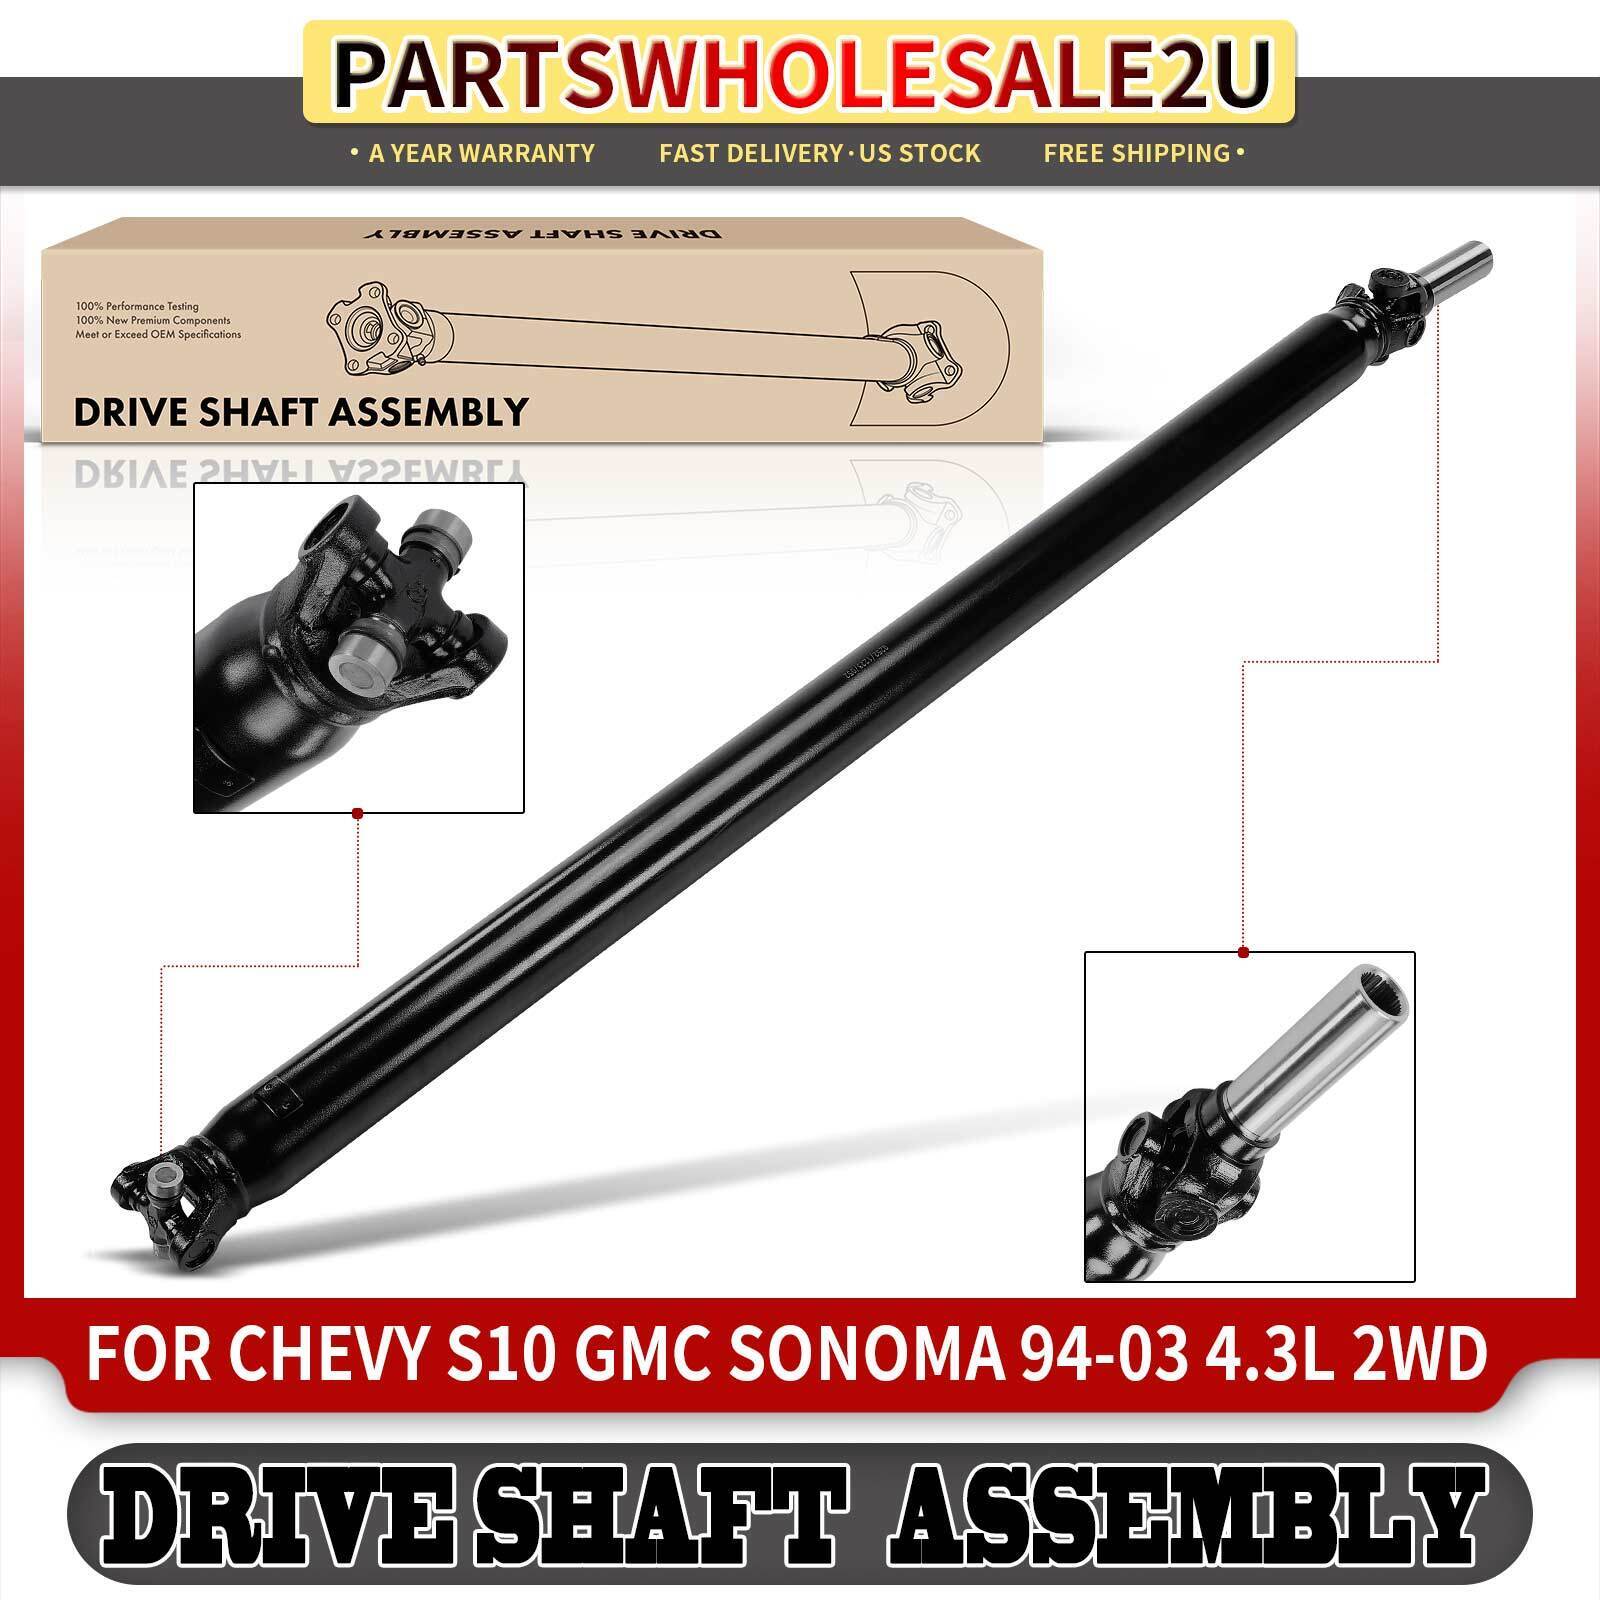 Rear Drivershaft Prop Shaft Assy for Chevy S10 S15 GMC Sonoma 94-03 V6 4.3L 2WD